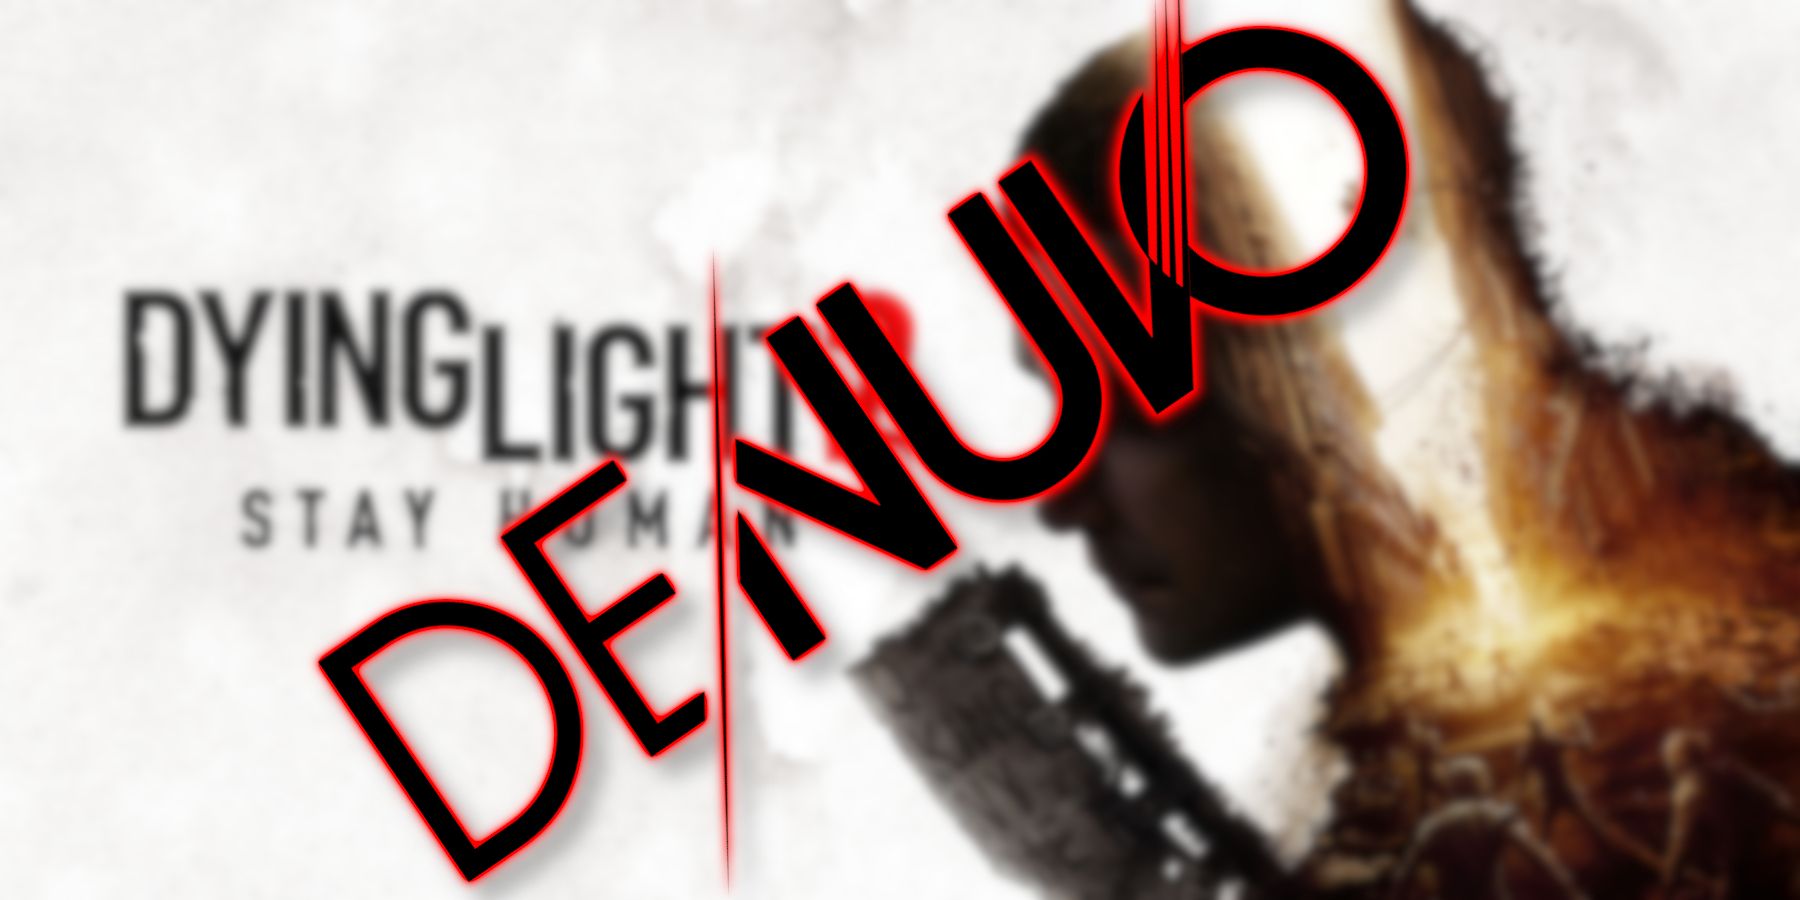 Dying Light 2 fans miffed after a last-minute Denuvo reveal